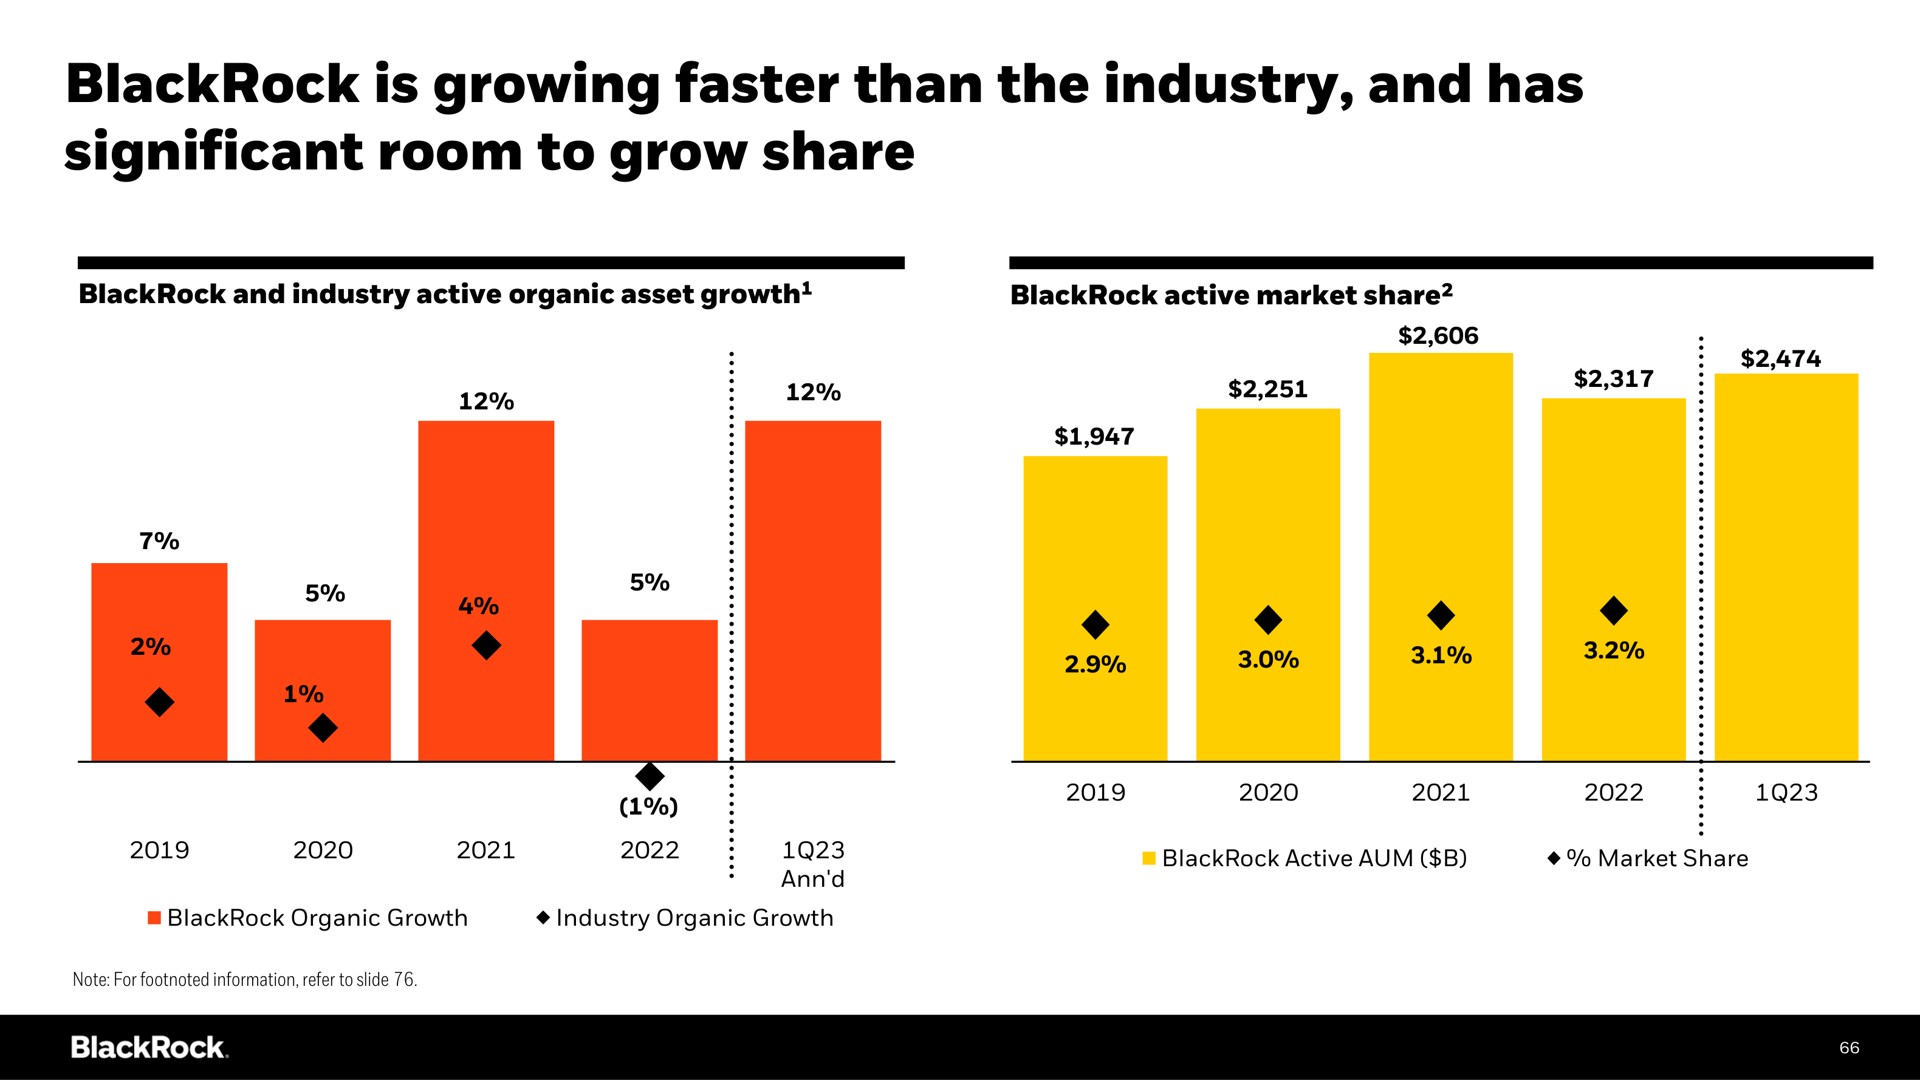 is growing faster than the industry and has significant room to grow share | BlackRock